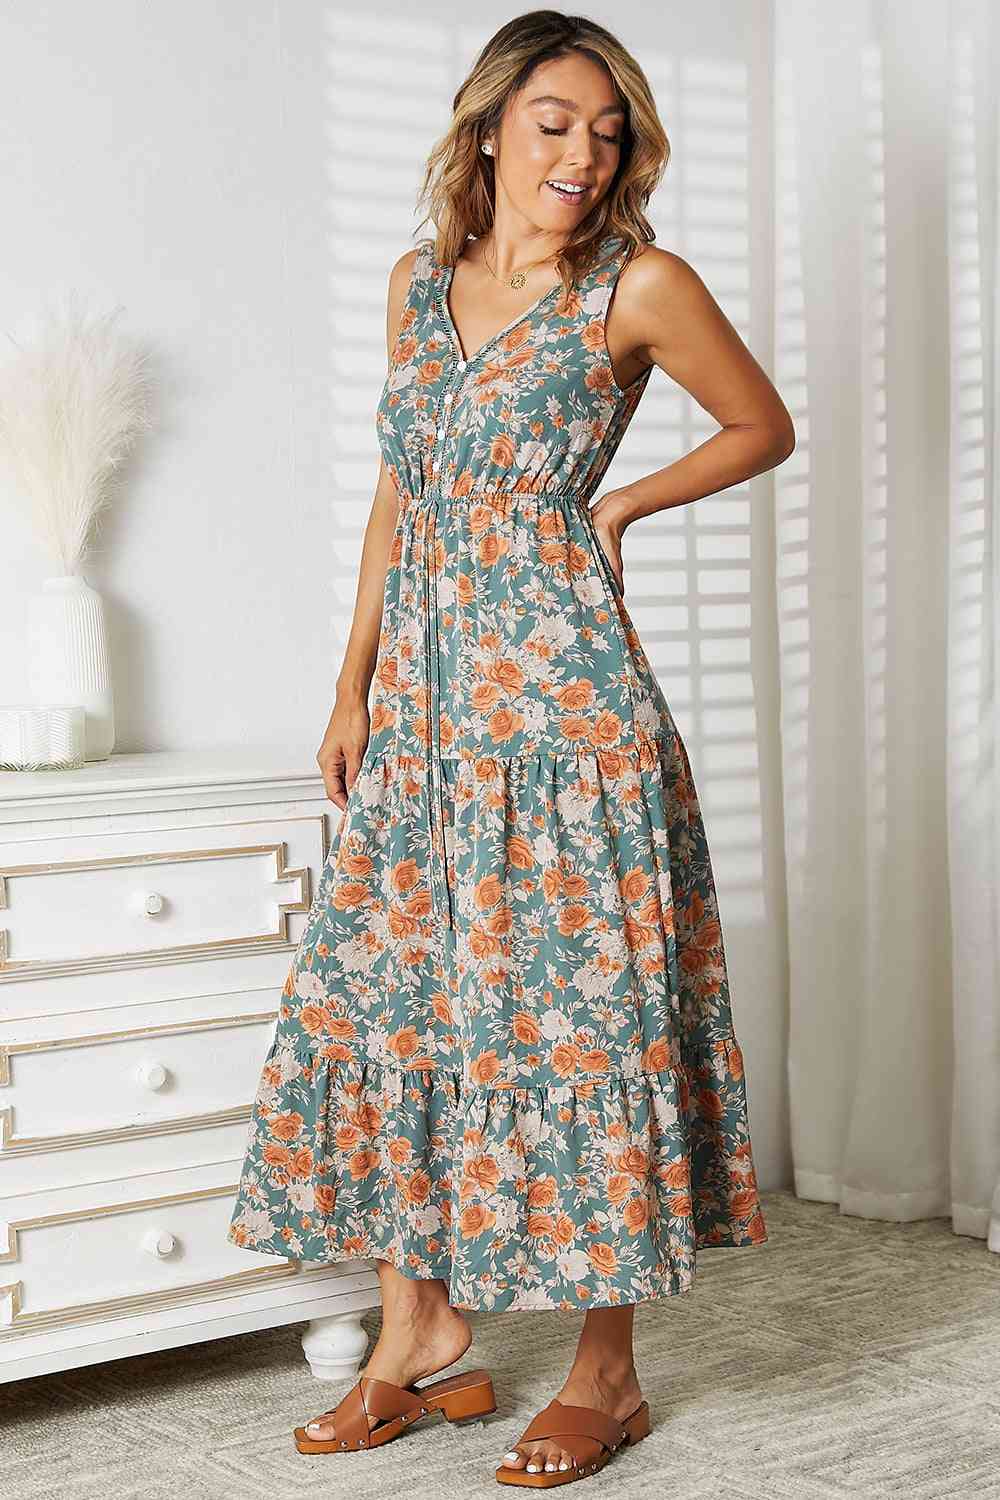 ITEM MUST SHIP Double Take Floral V-Neck Tiered Sleeveless Dress